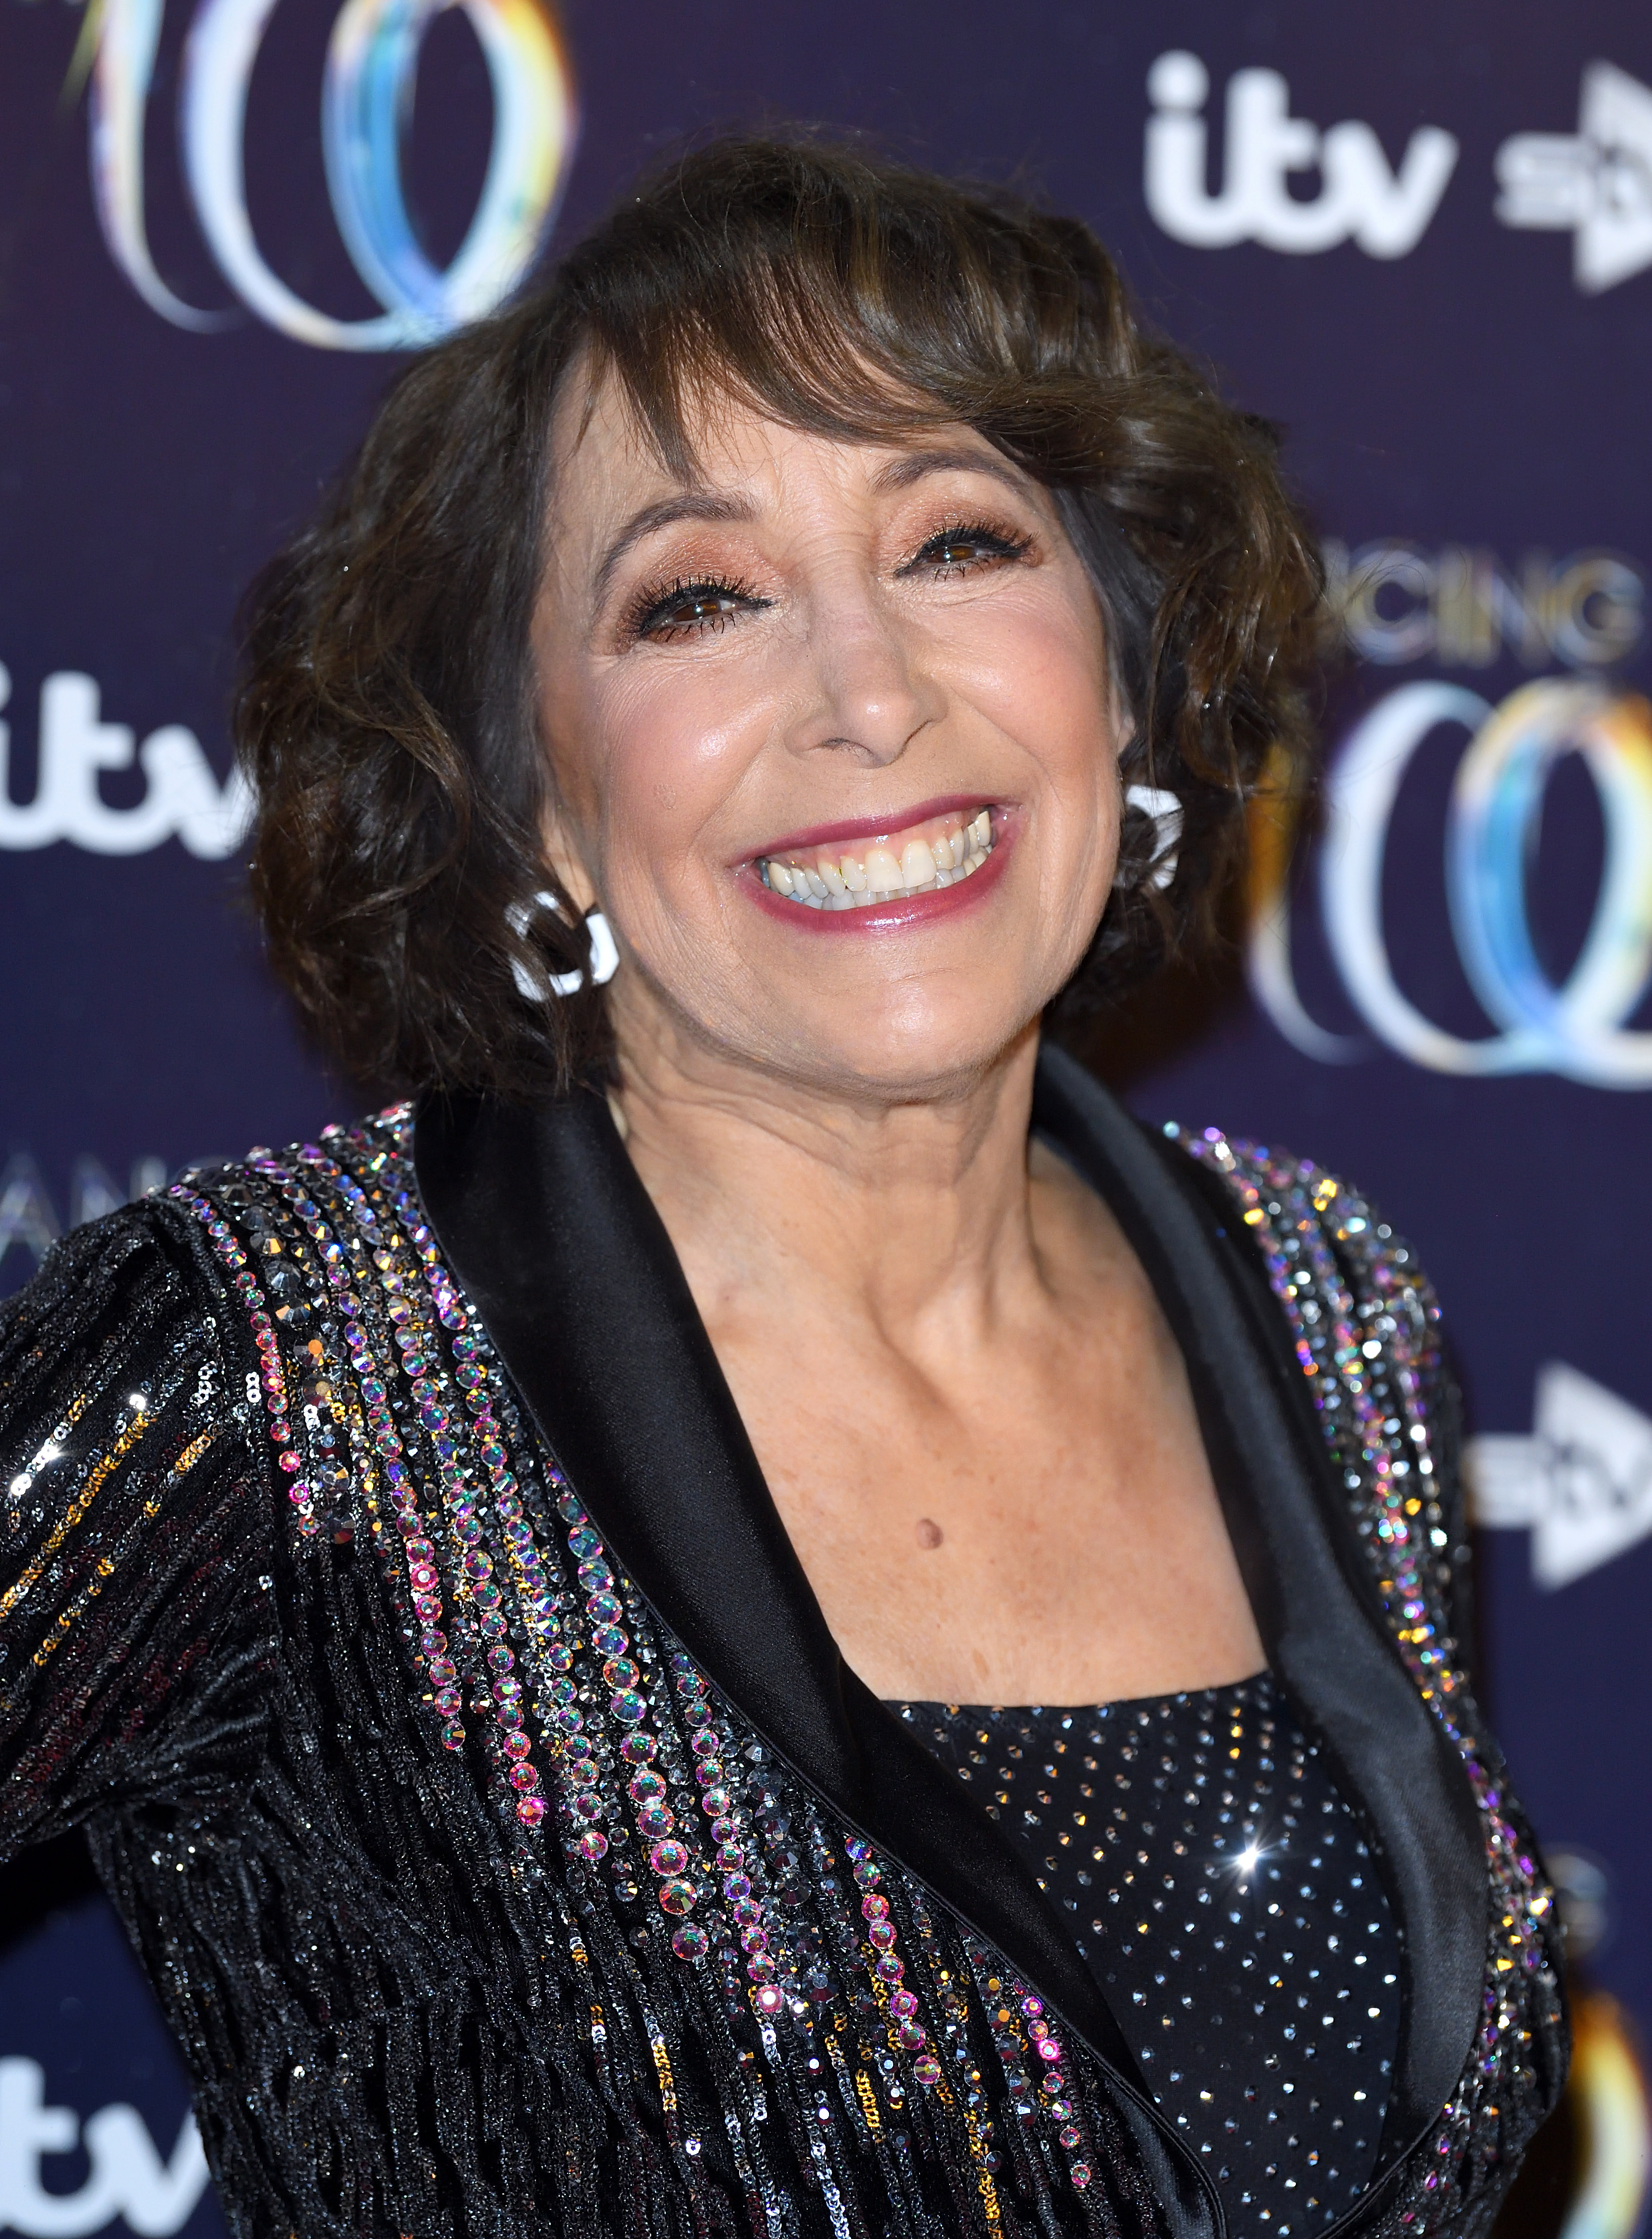 Didi Conn at a photocall for "Dancing on Ice" on December 18, 2018, in London, England | Source: Getty Images